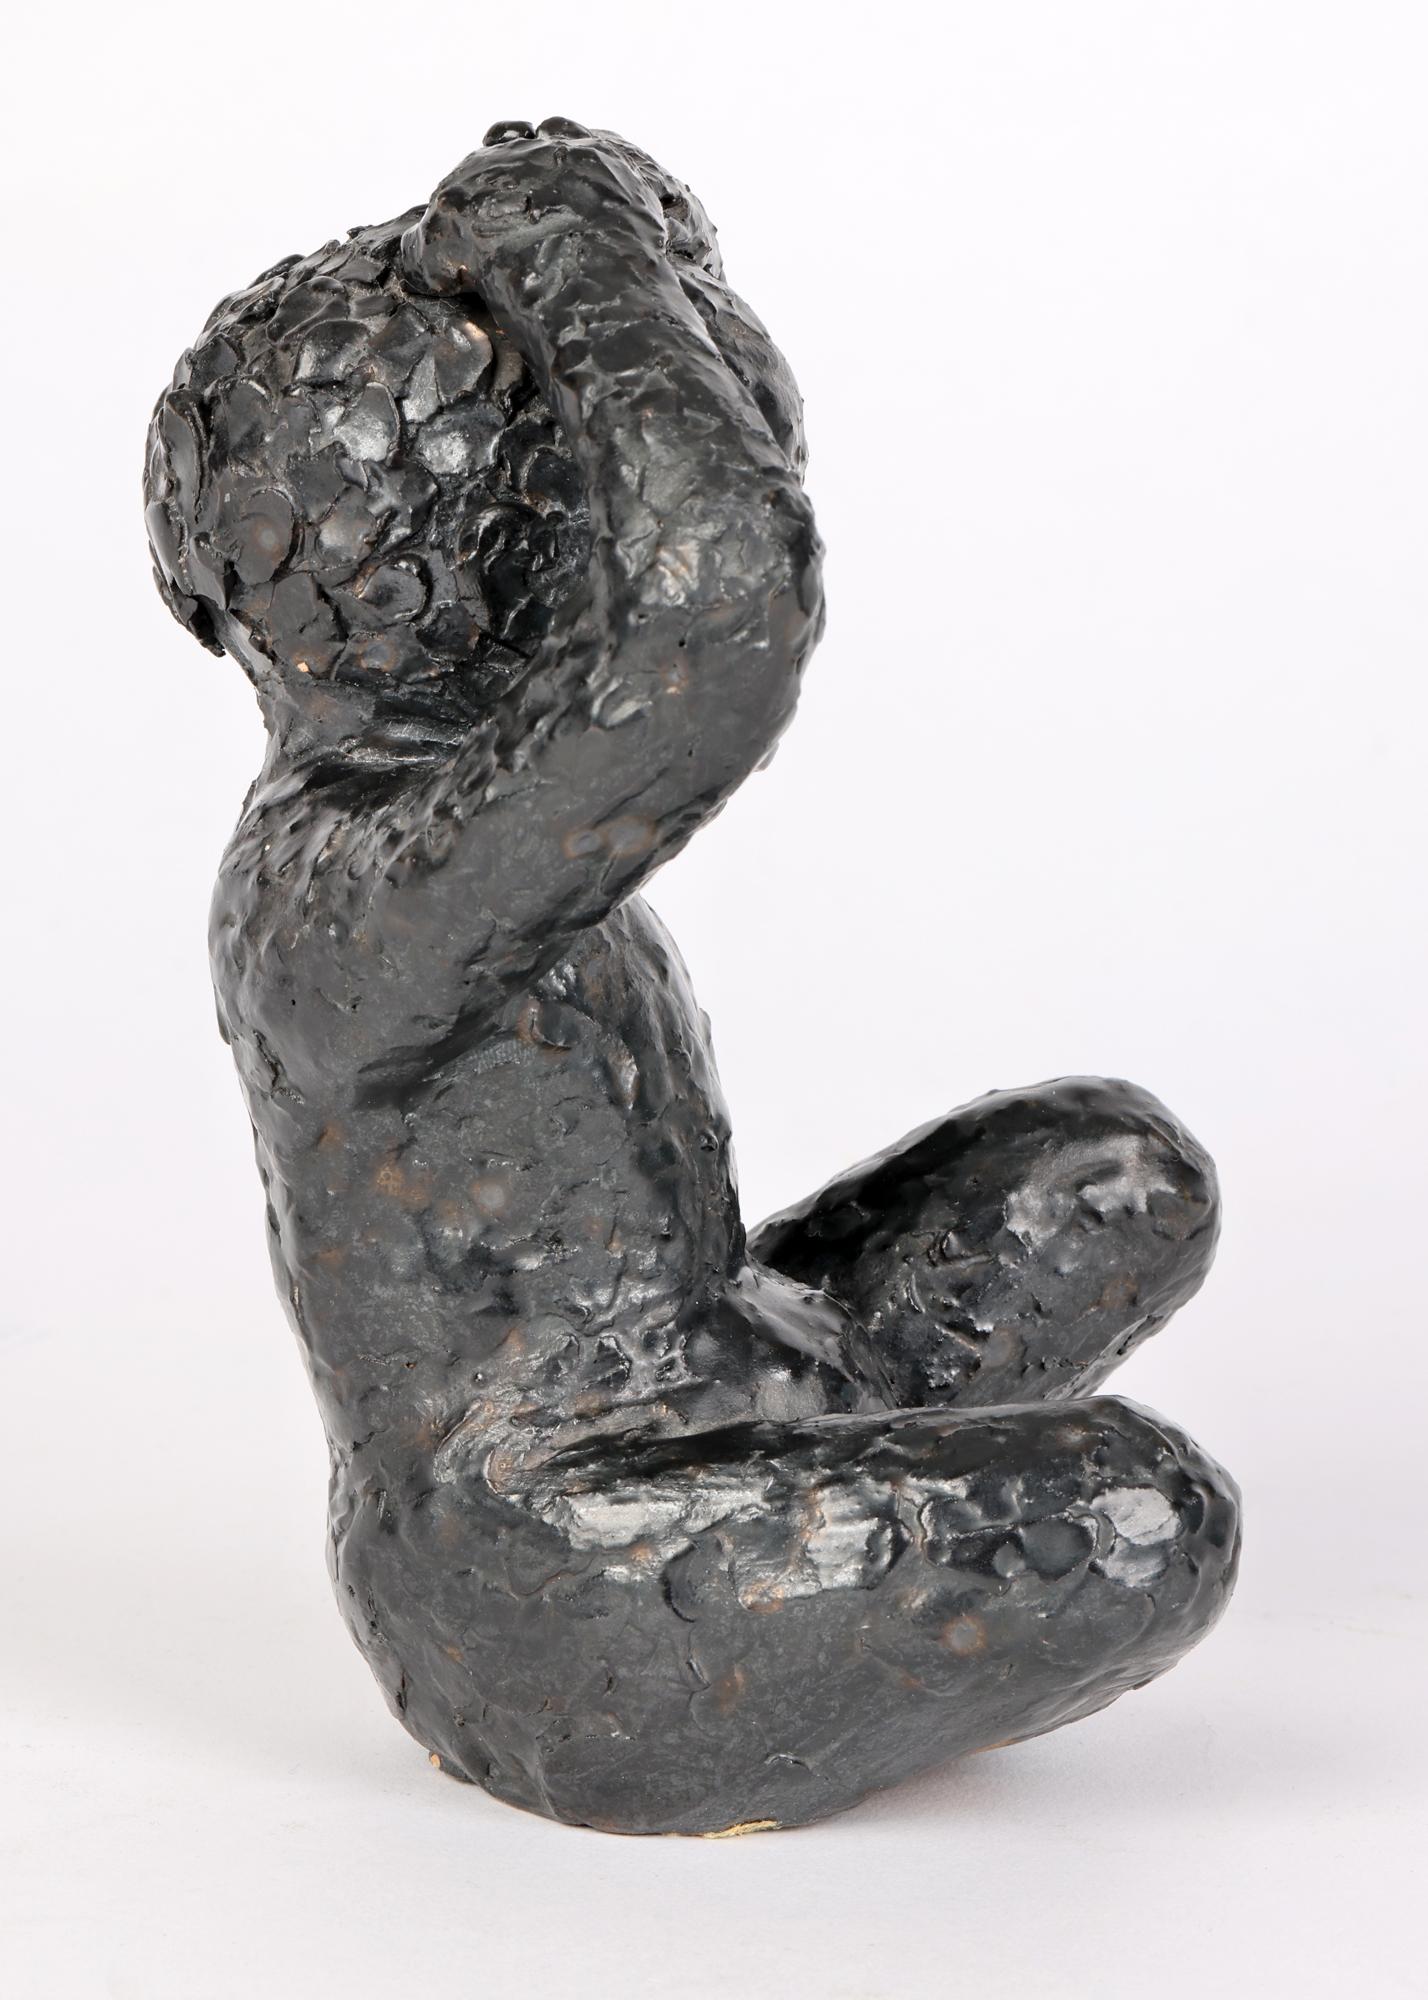 George West Studio Pottery Black Glazed Seated Child Sculpture Dated 1969 For Sale 5